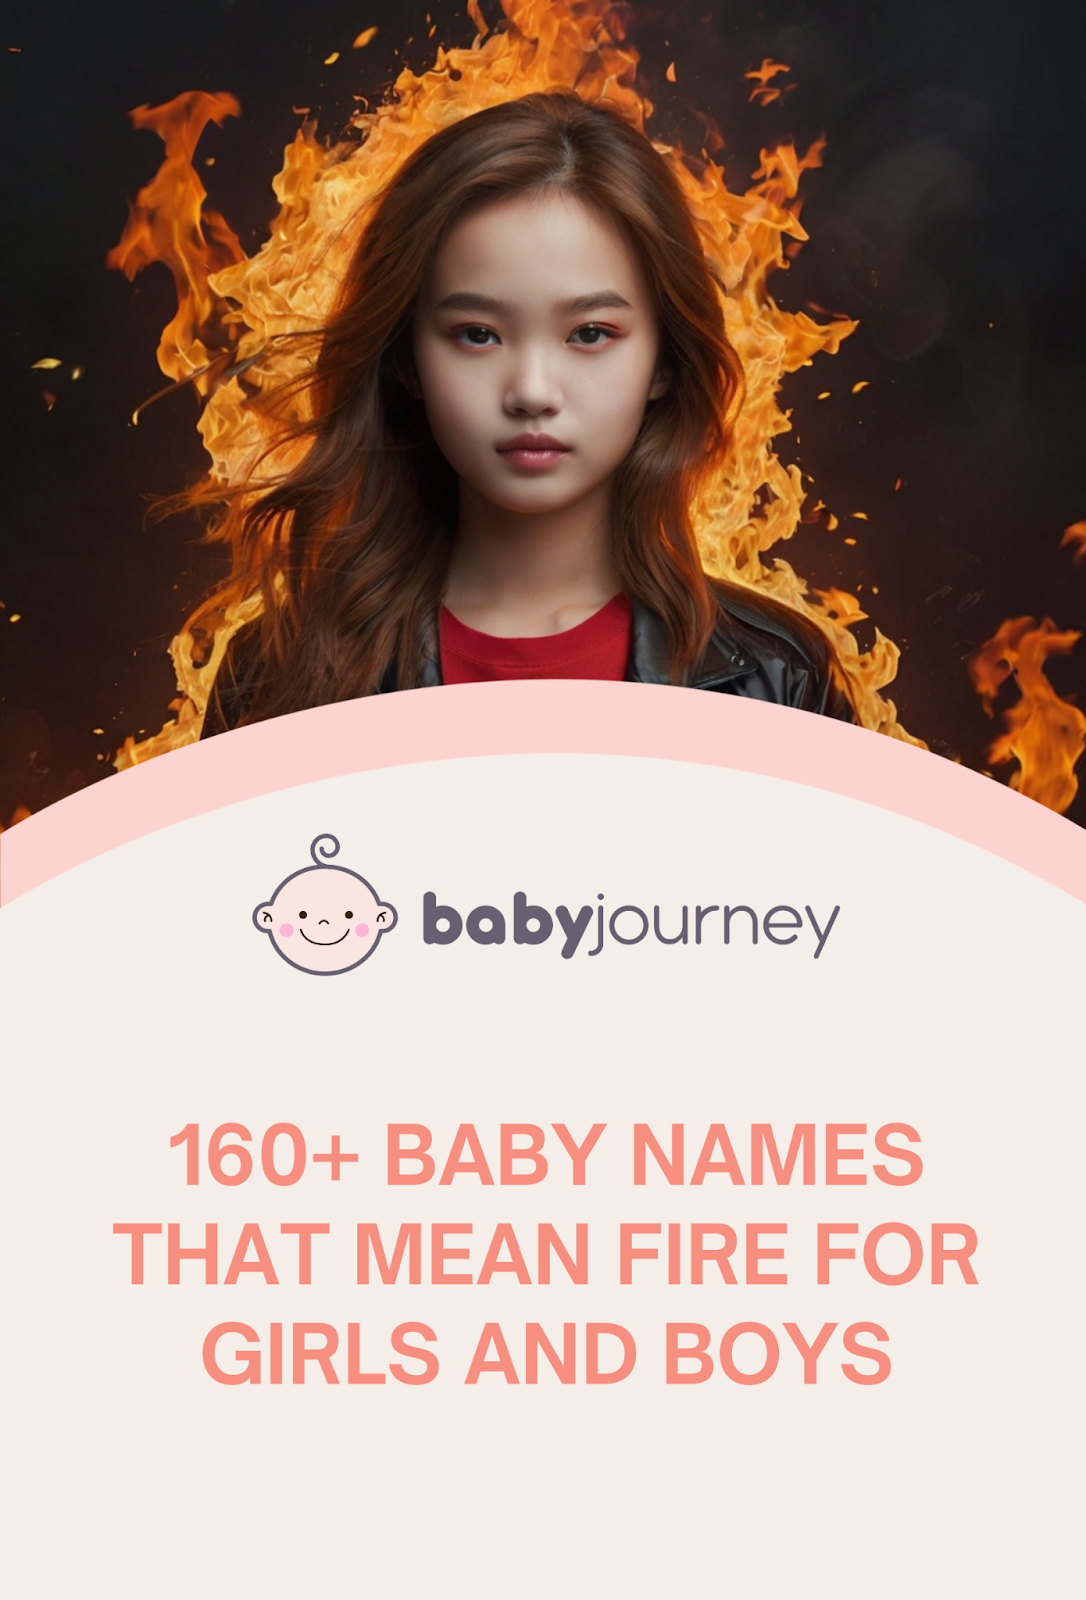 200+ Baby Names That Mean Fire for Girls and Boys - Names That Mean Fire - Baby Journey